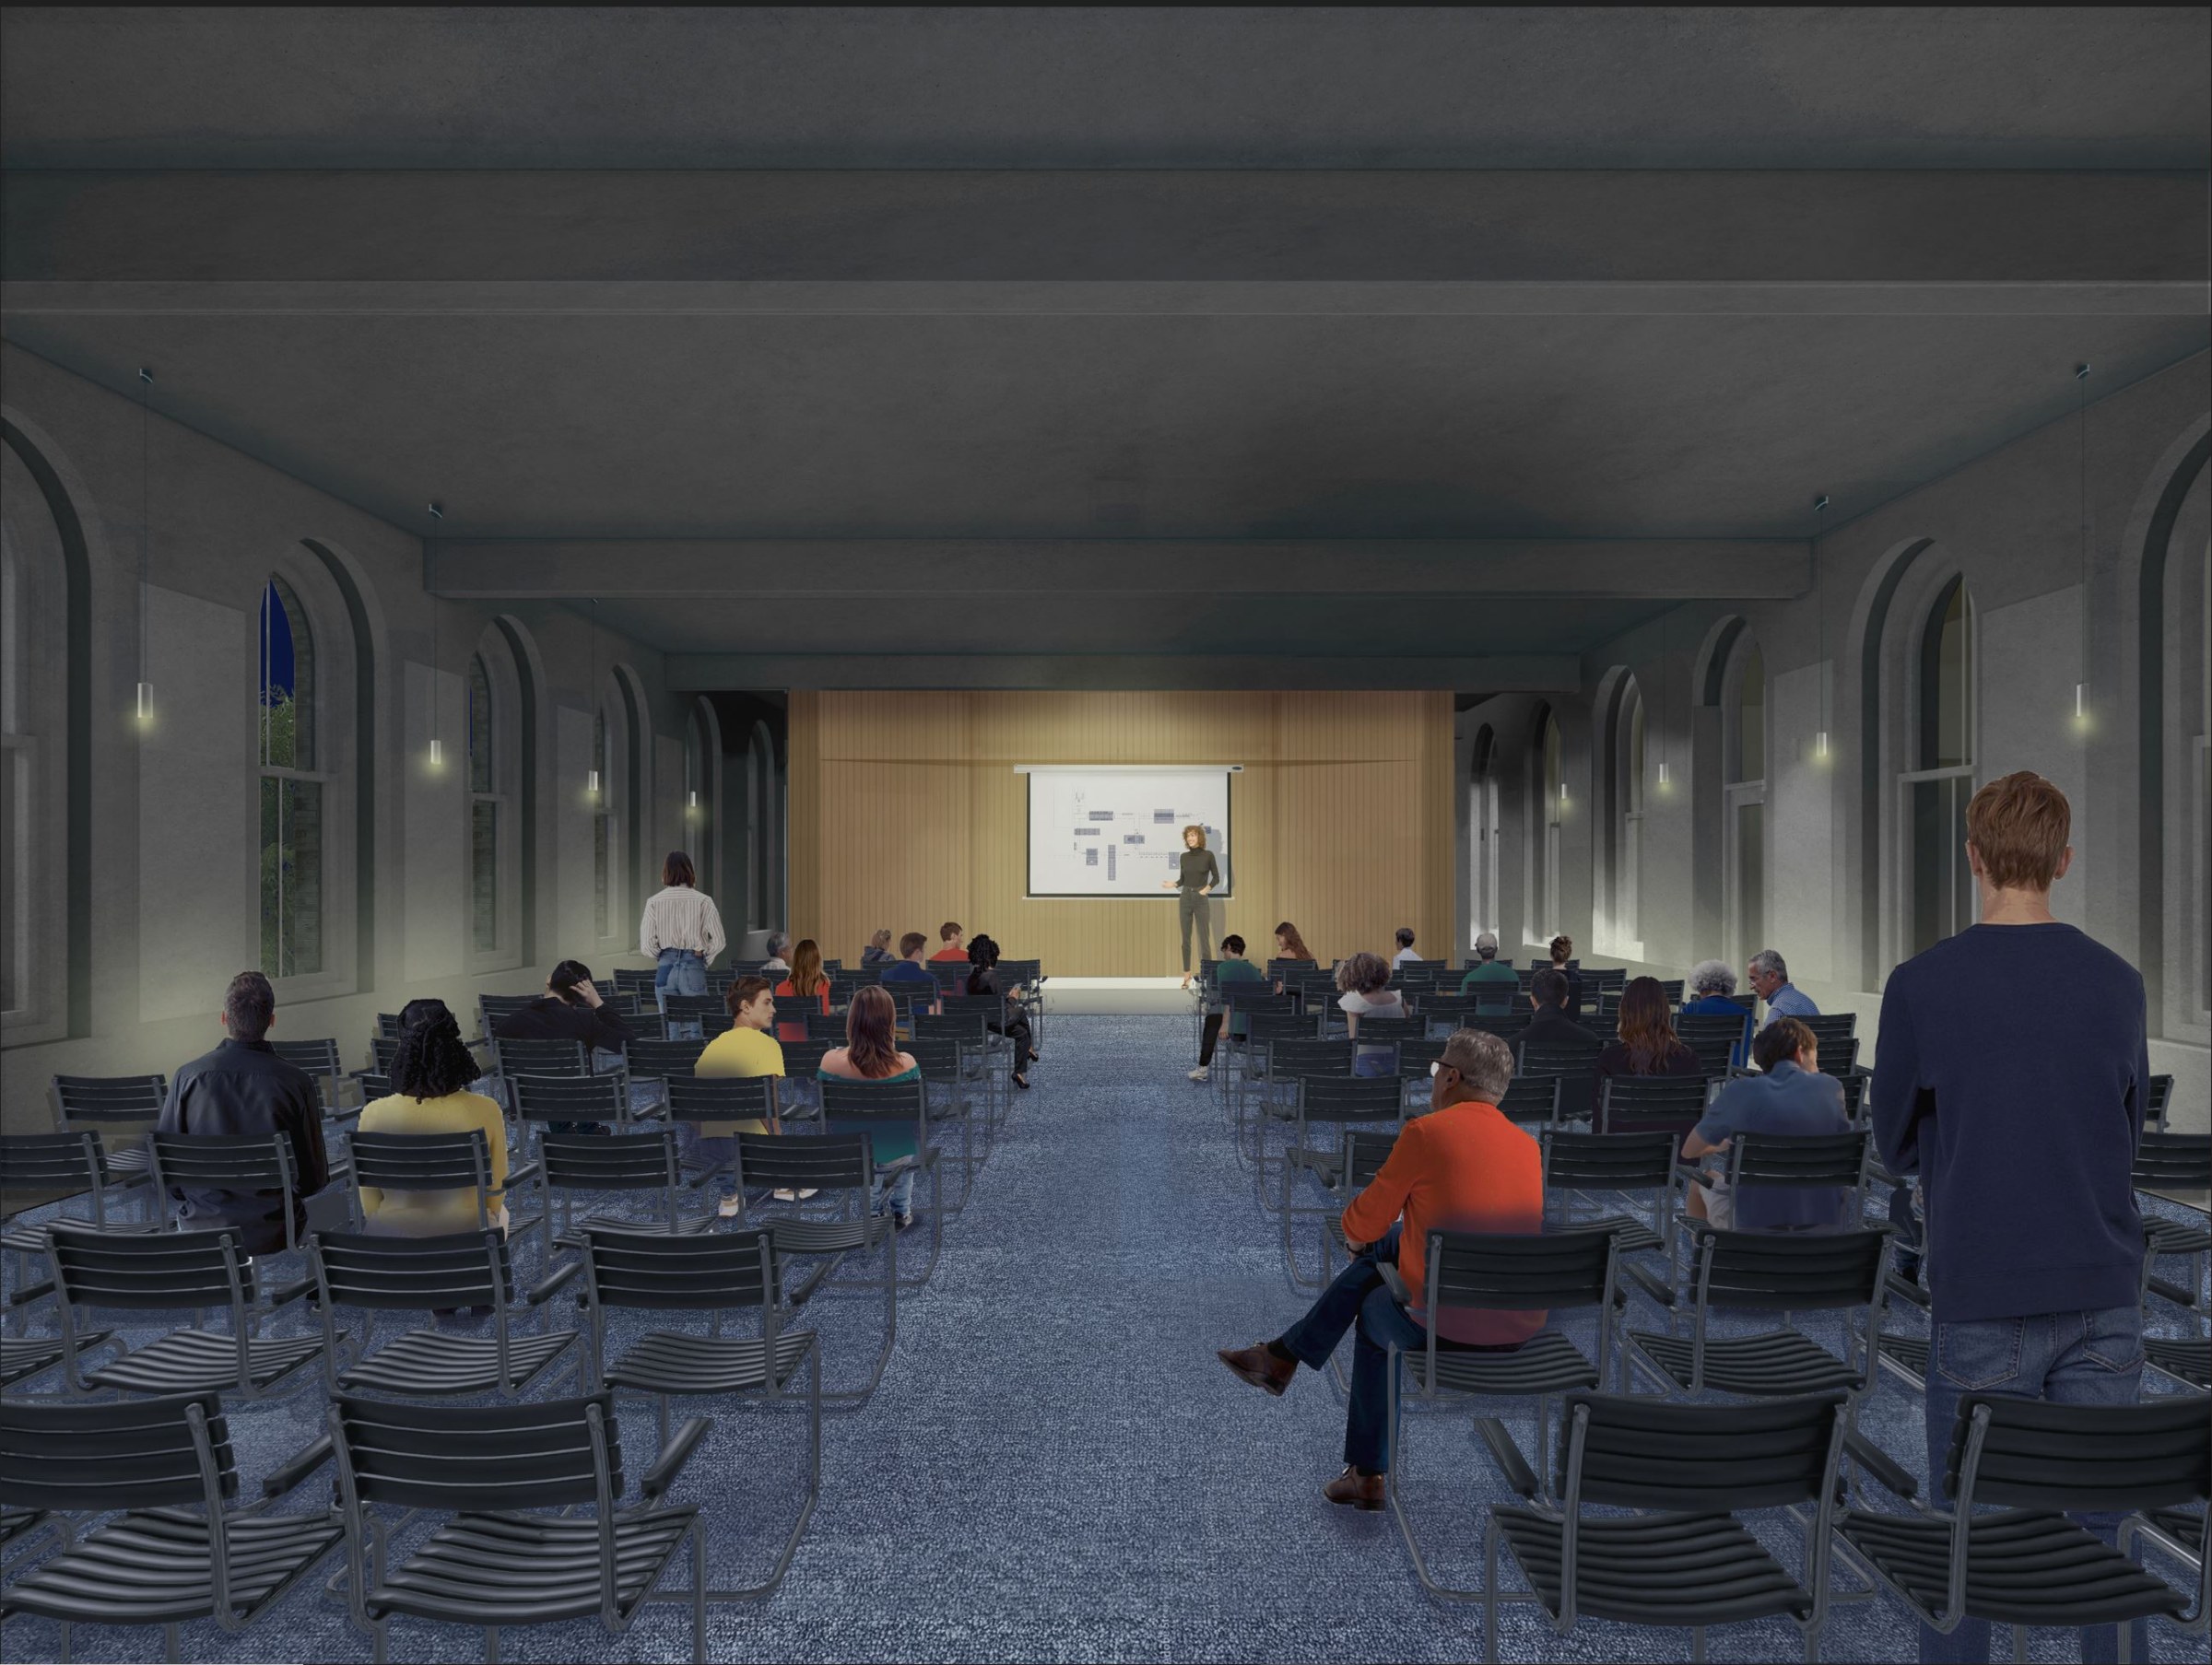 Interior perspective render of a large lecture hall with the lights off, looking at the stage from the back of the room with several rows of chairs in front of the stage